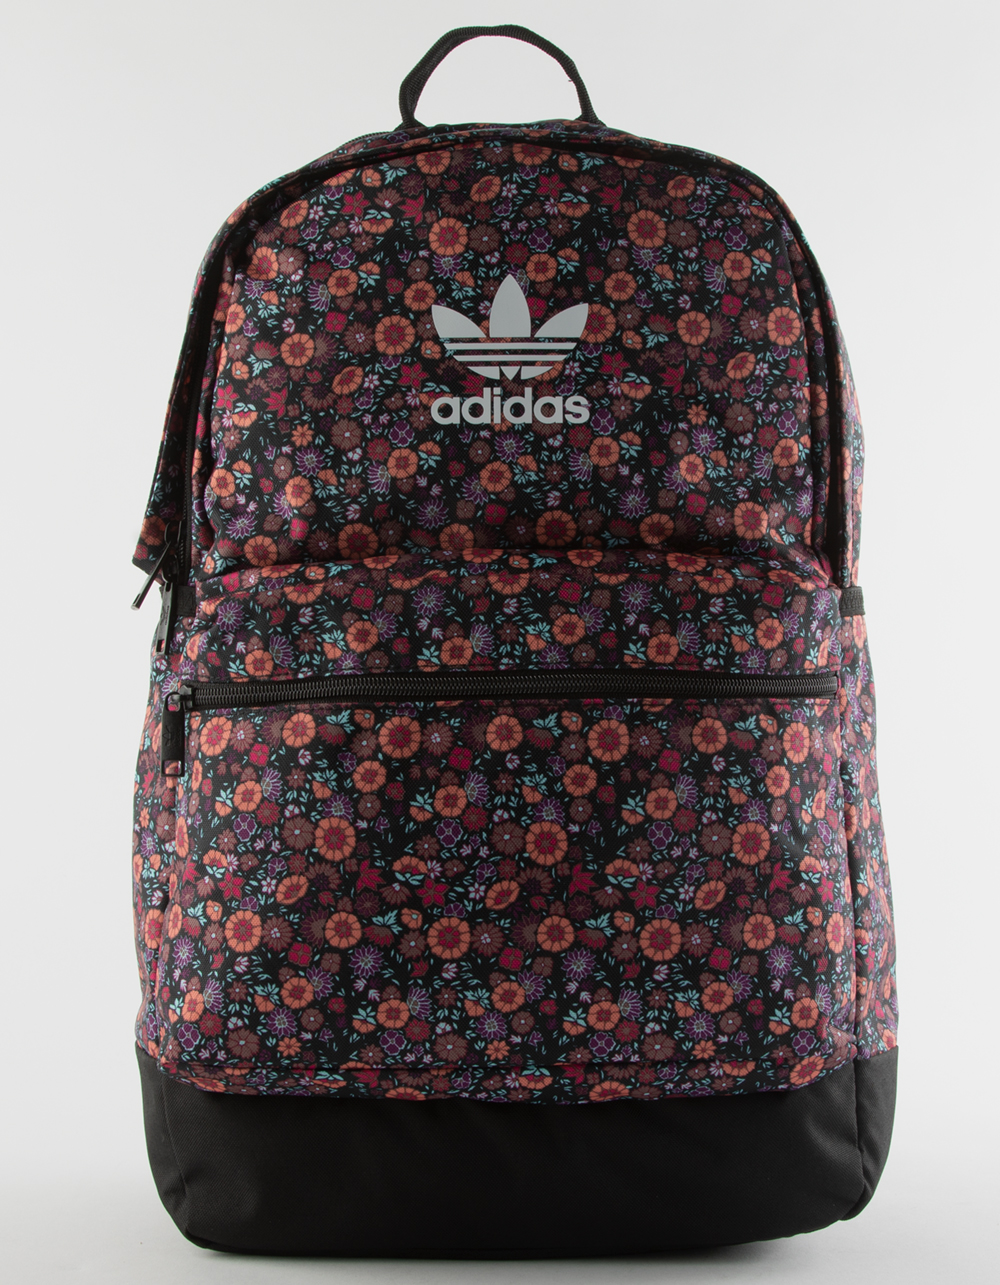 adidas Clothing & Accessories | Tillys